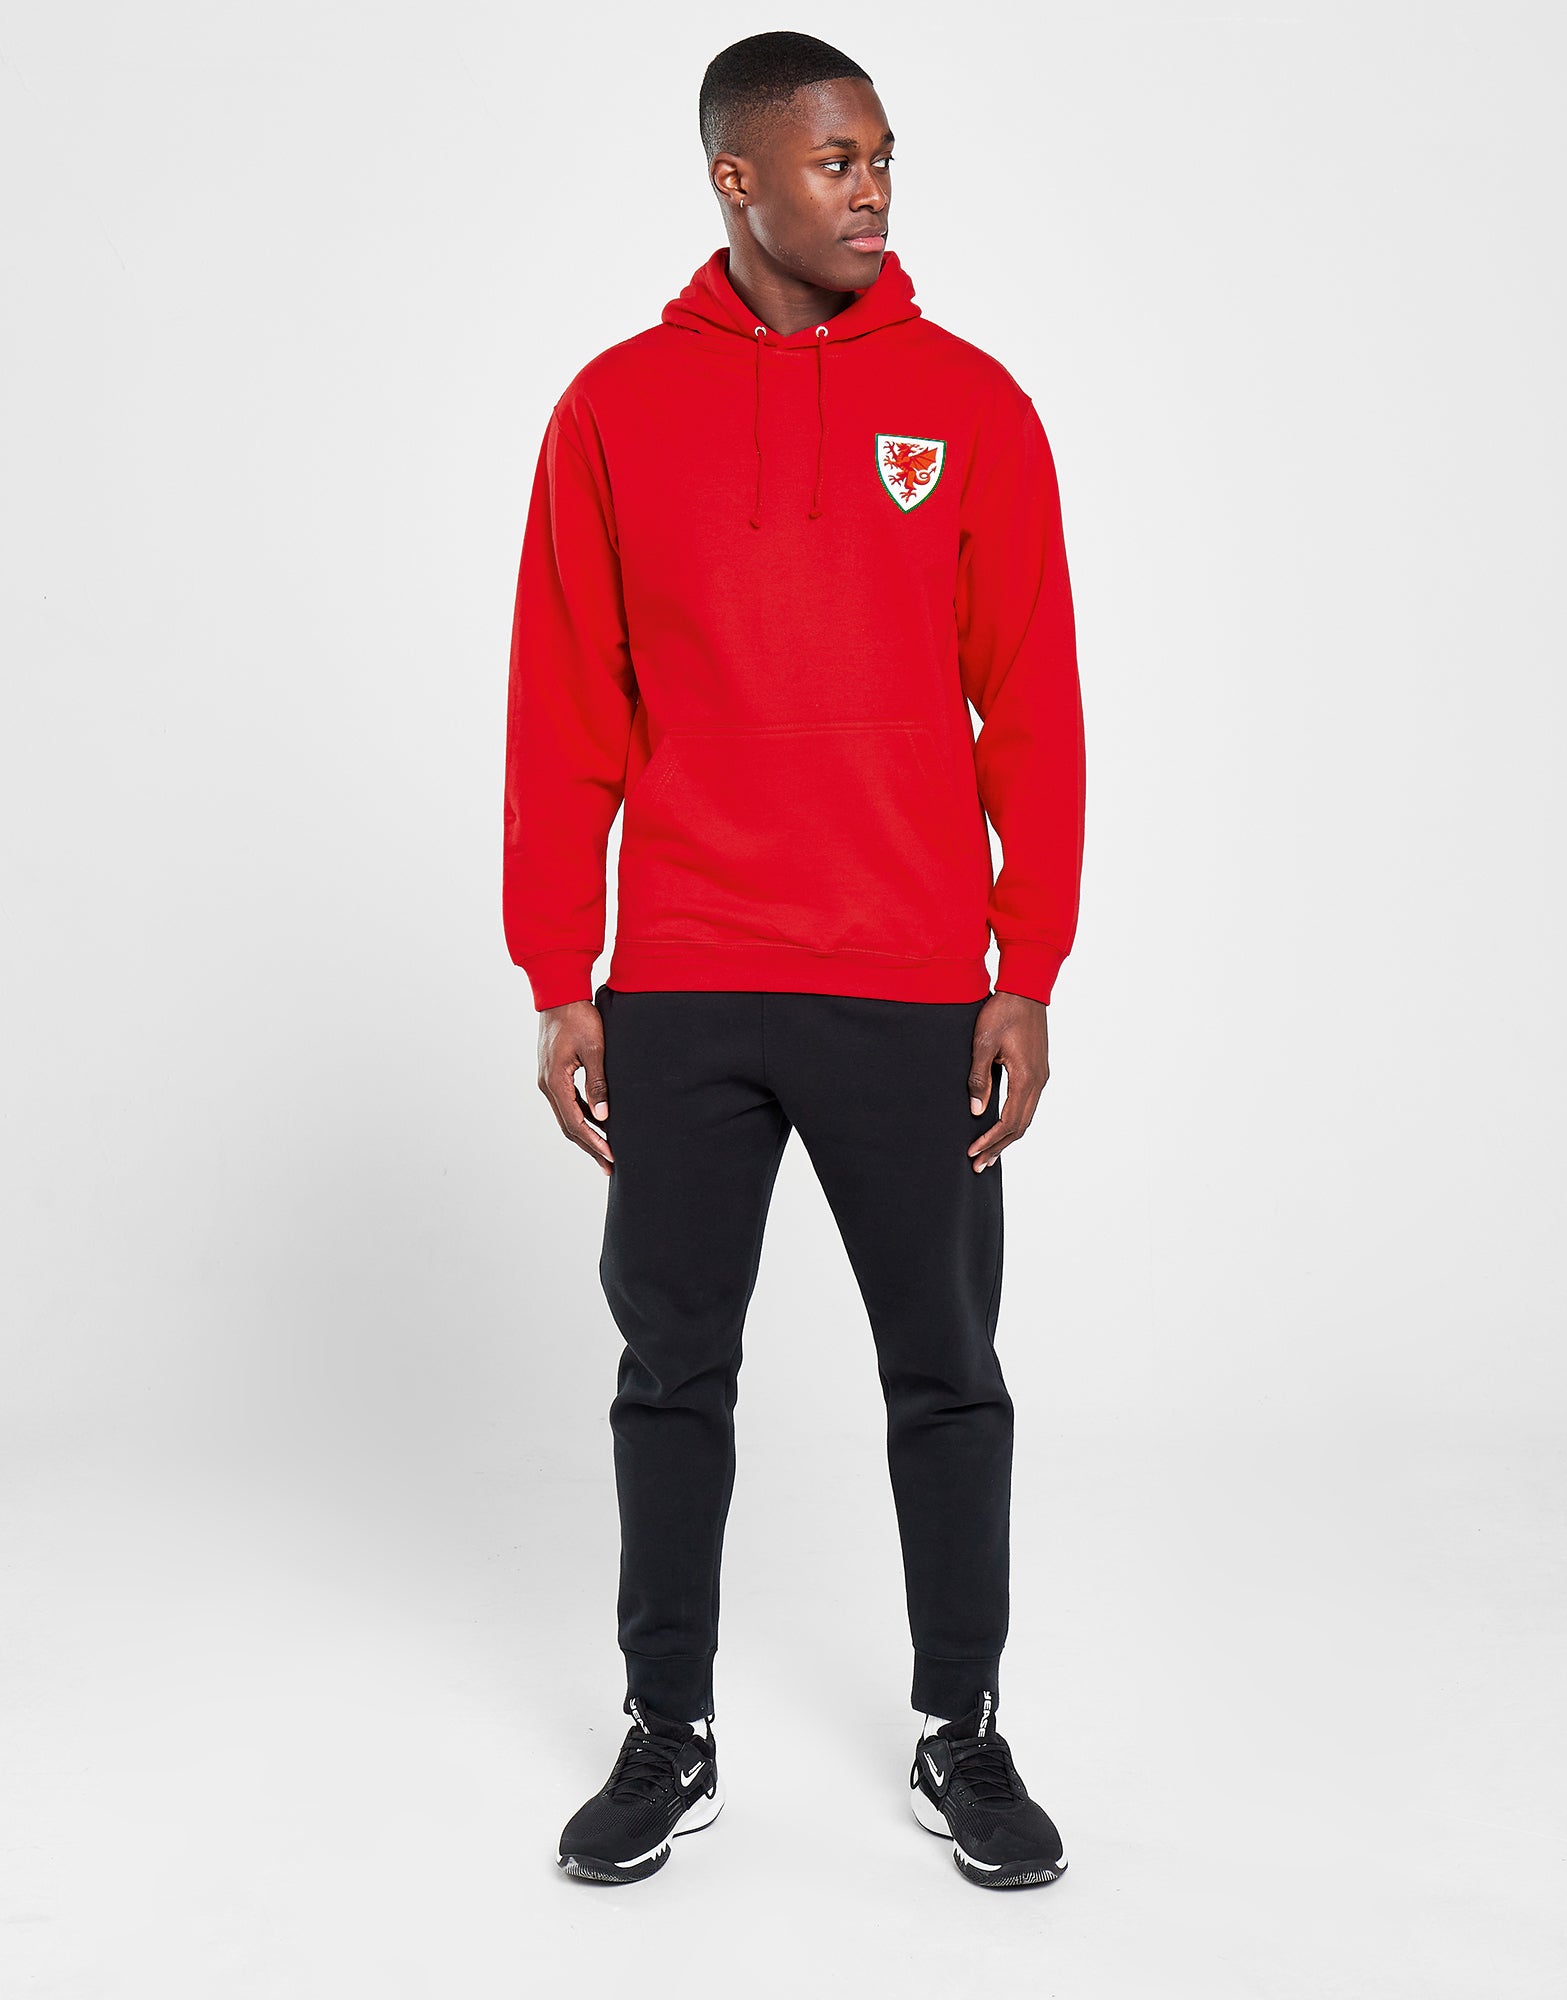 Official Team Wales Hoodie - Red - The World Football Store